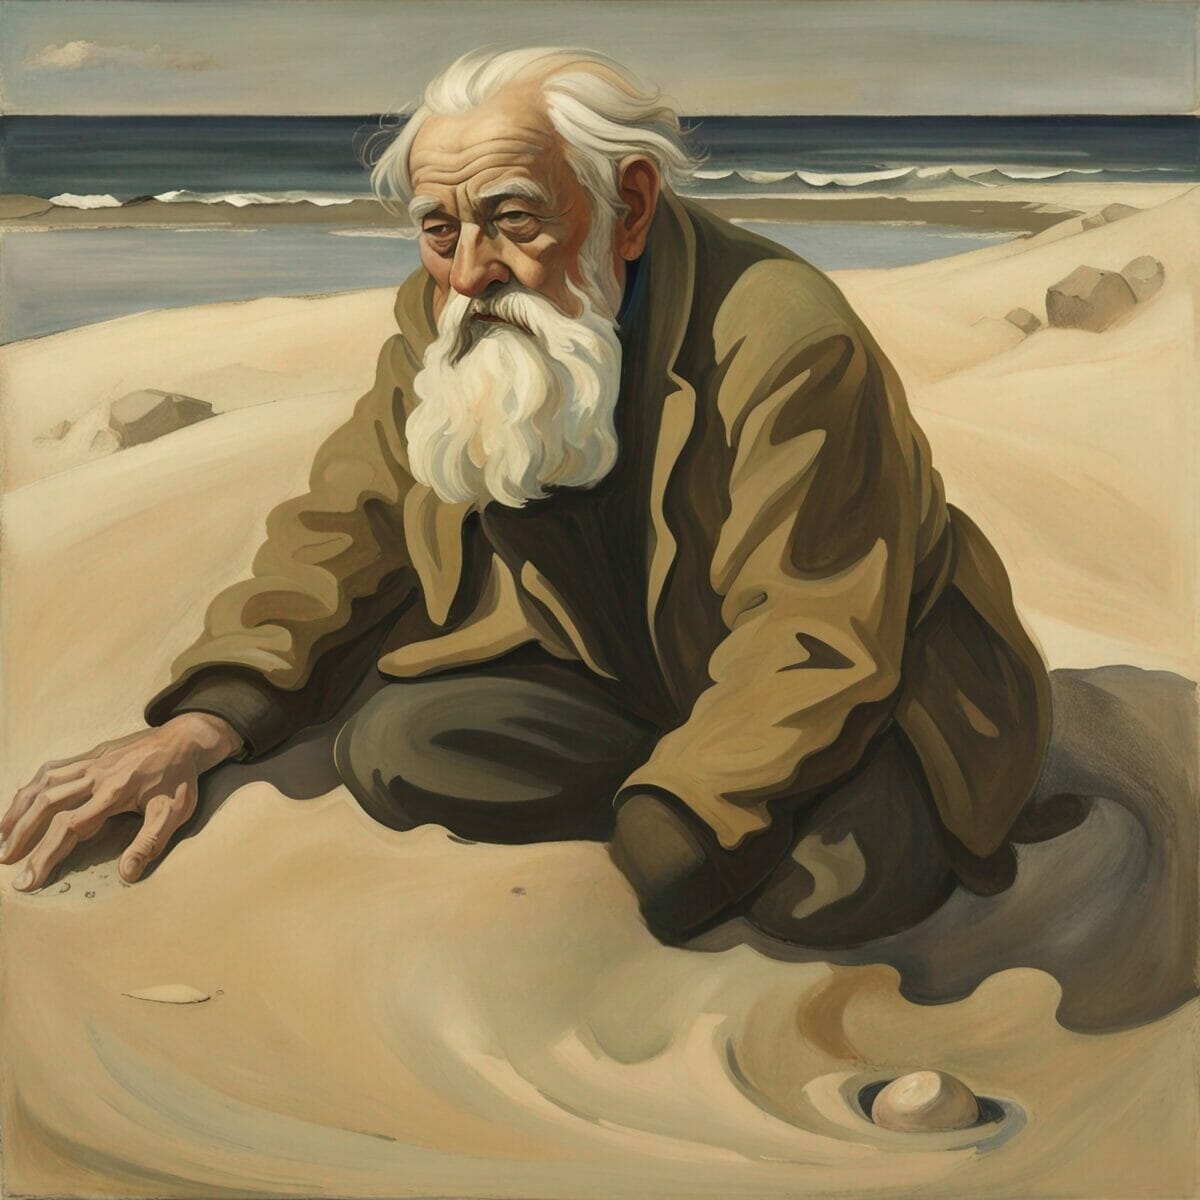 Sands of Time image 2. An old man on the beach with a large white beard, wearing a brown coat, and with one hand buried in the sand.